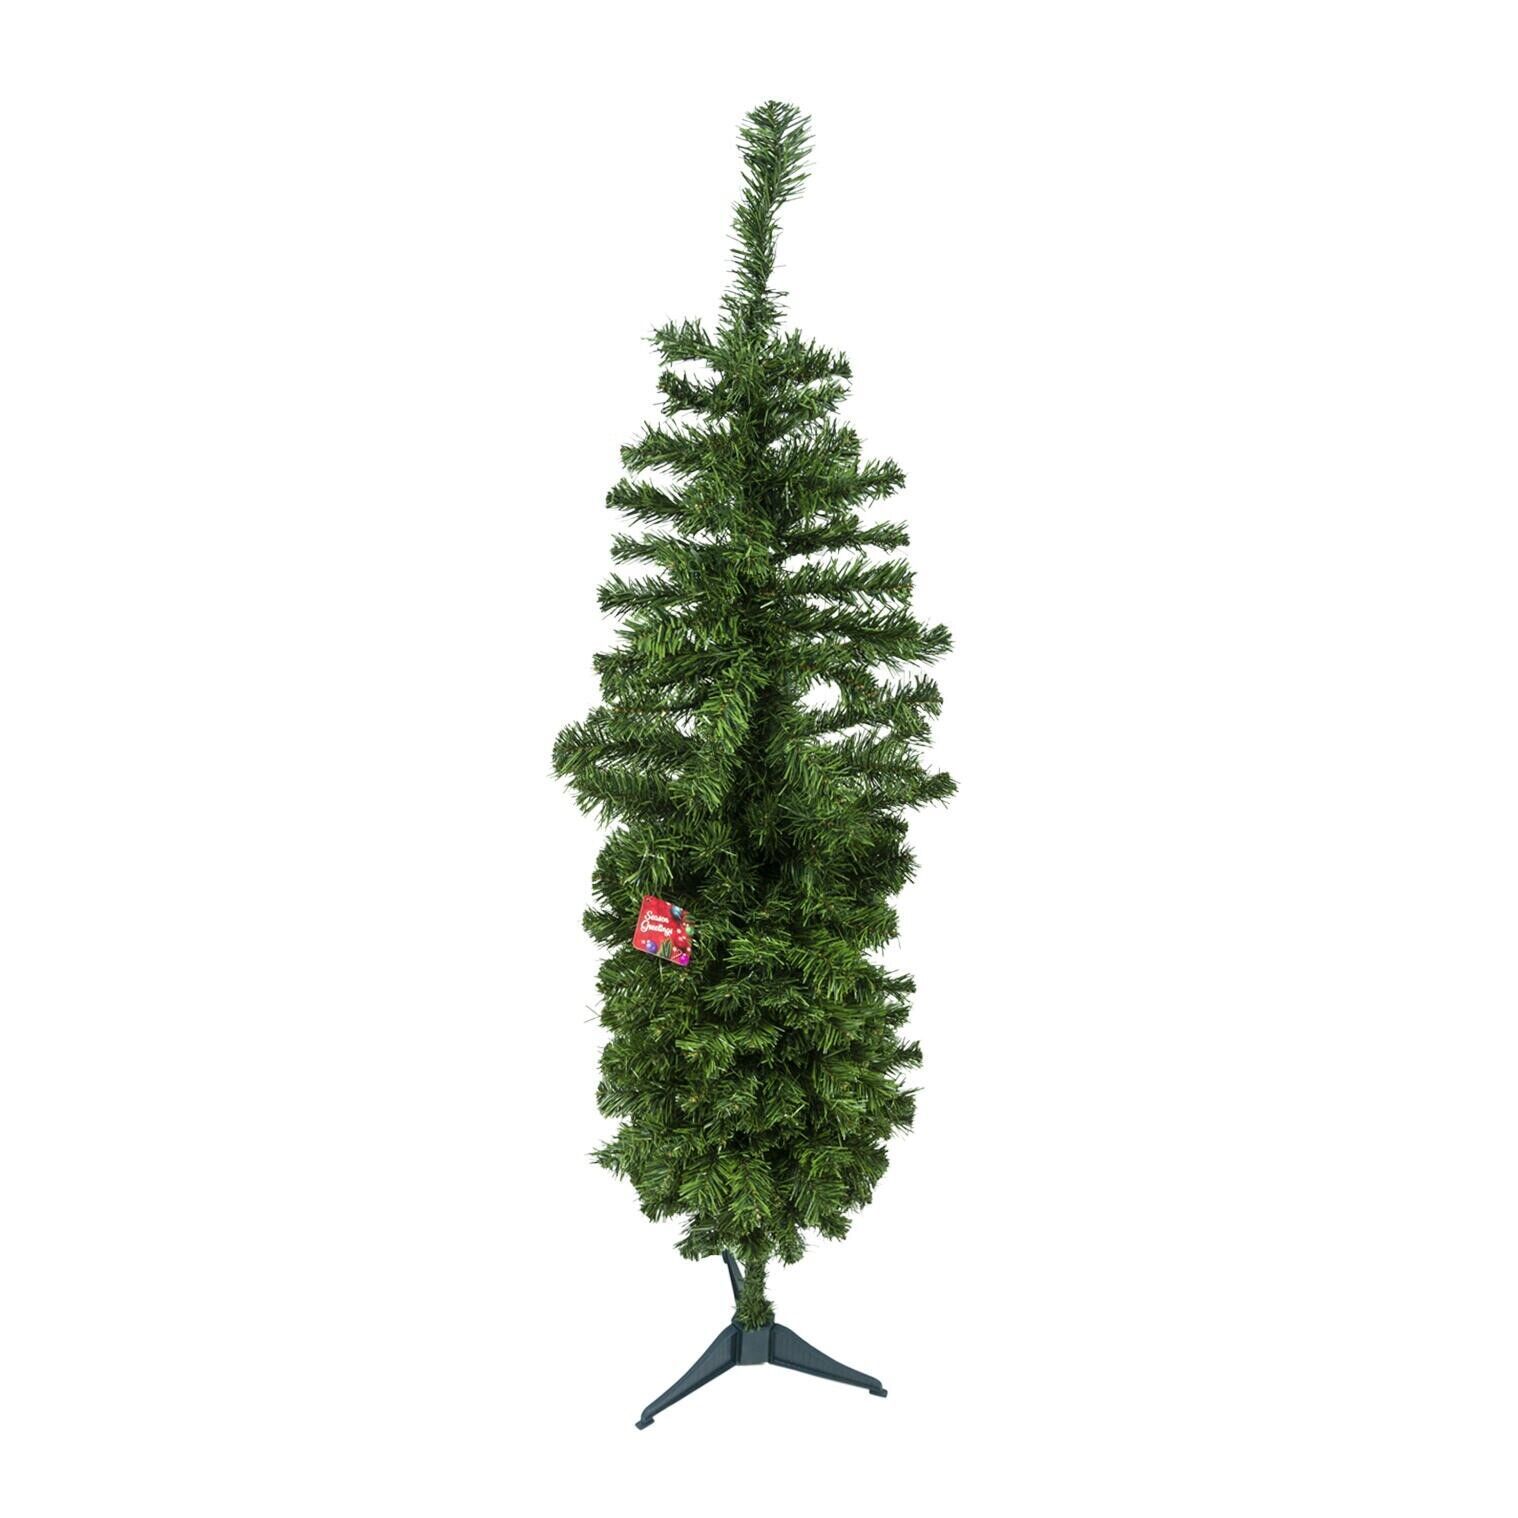 Primary image for Christmas Tree Green Artificial Slim Includes Plastic Stand 5 Foot